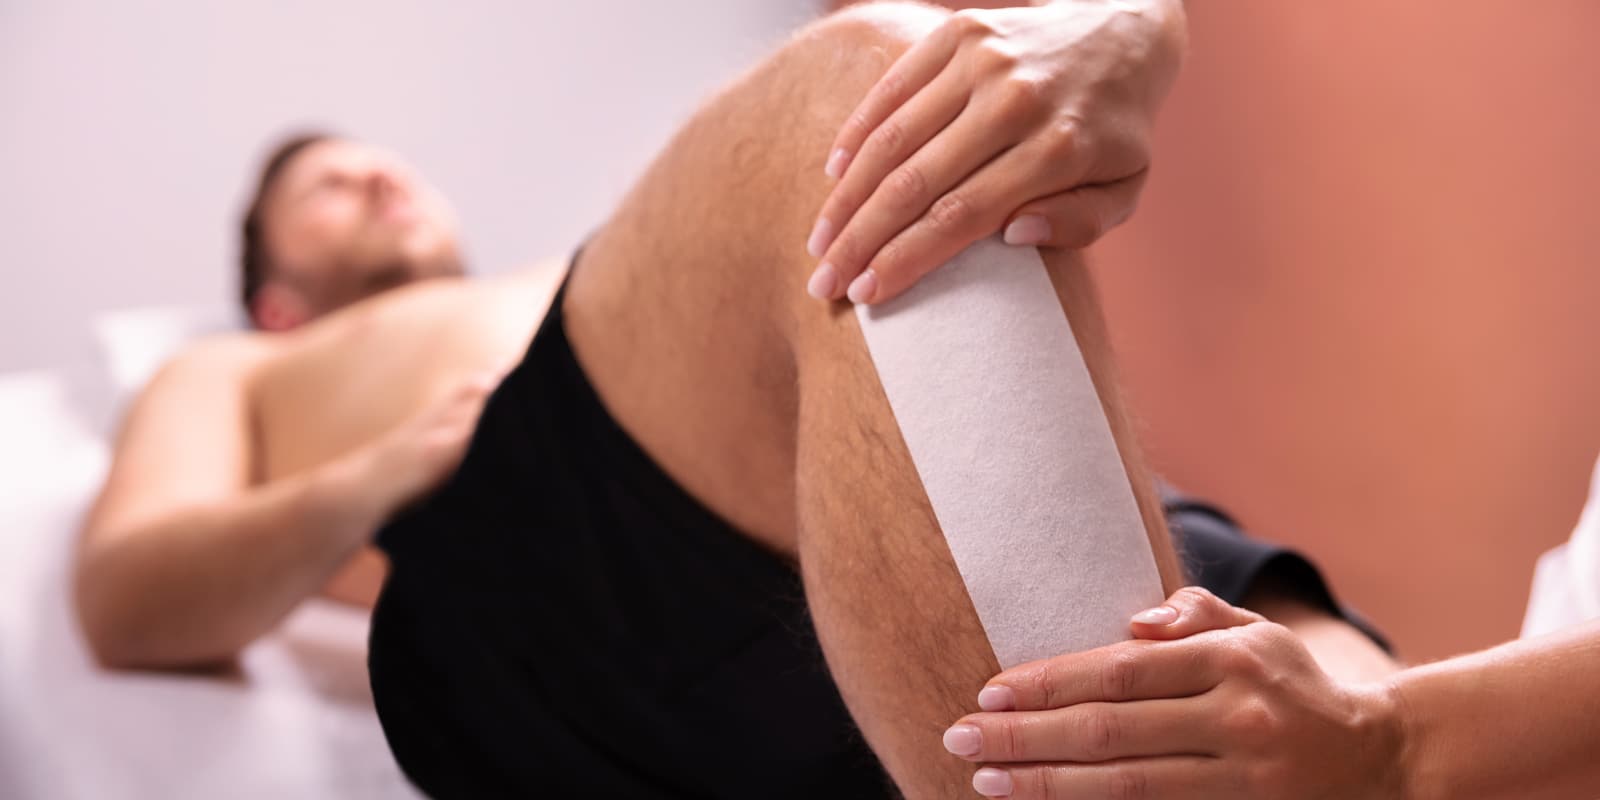 An image of a man getting his leg waxed